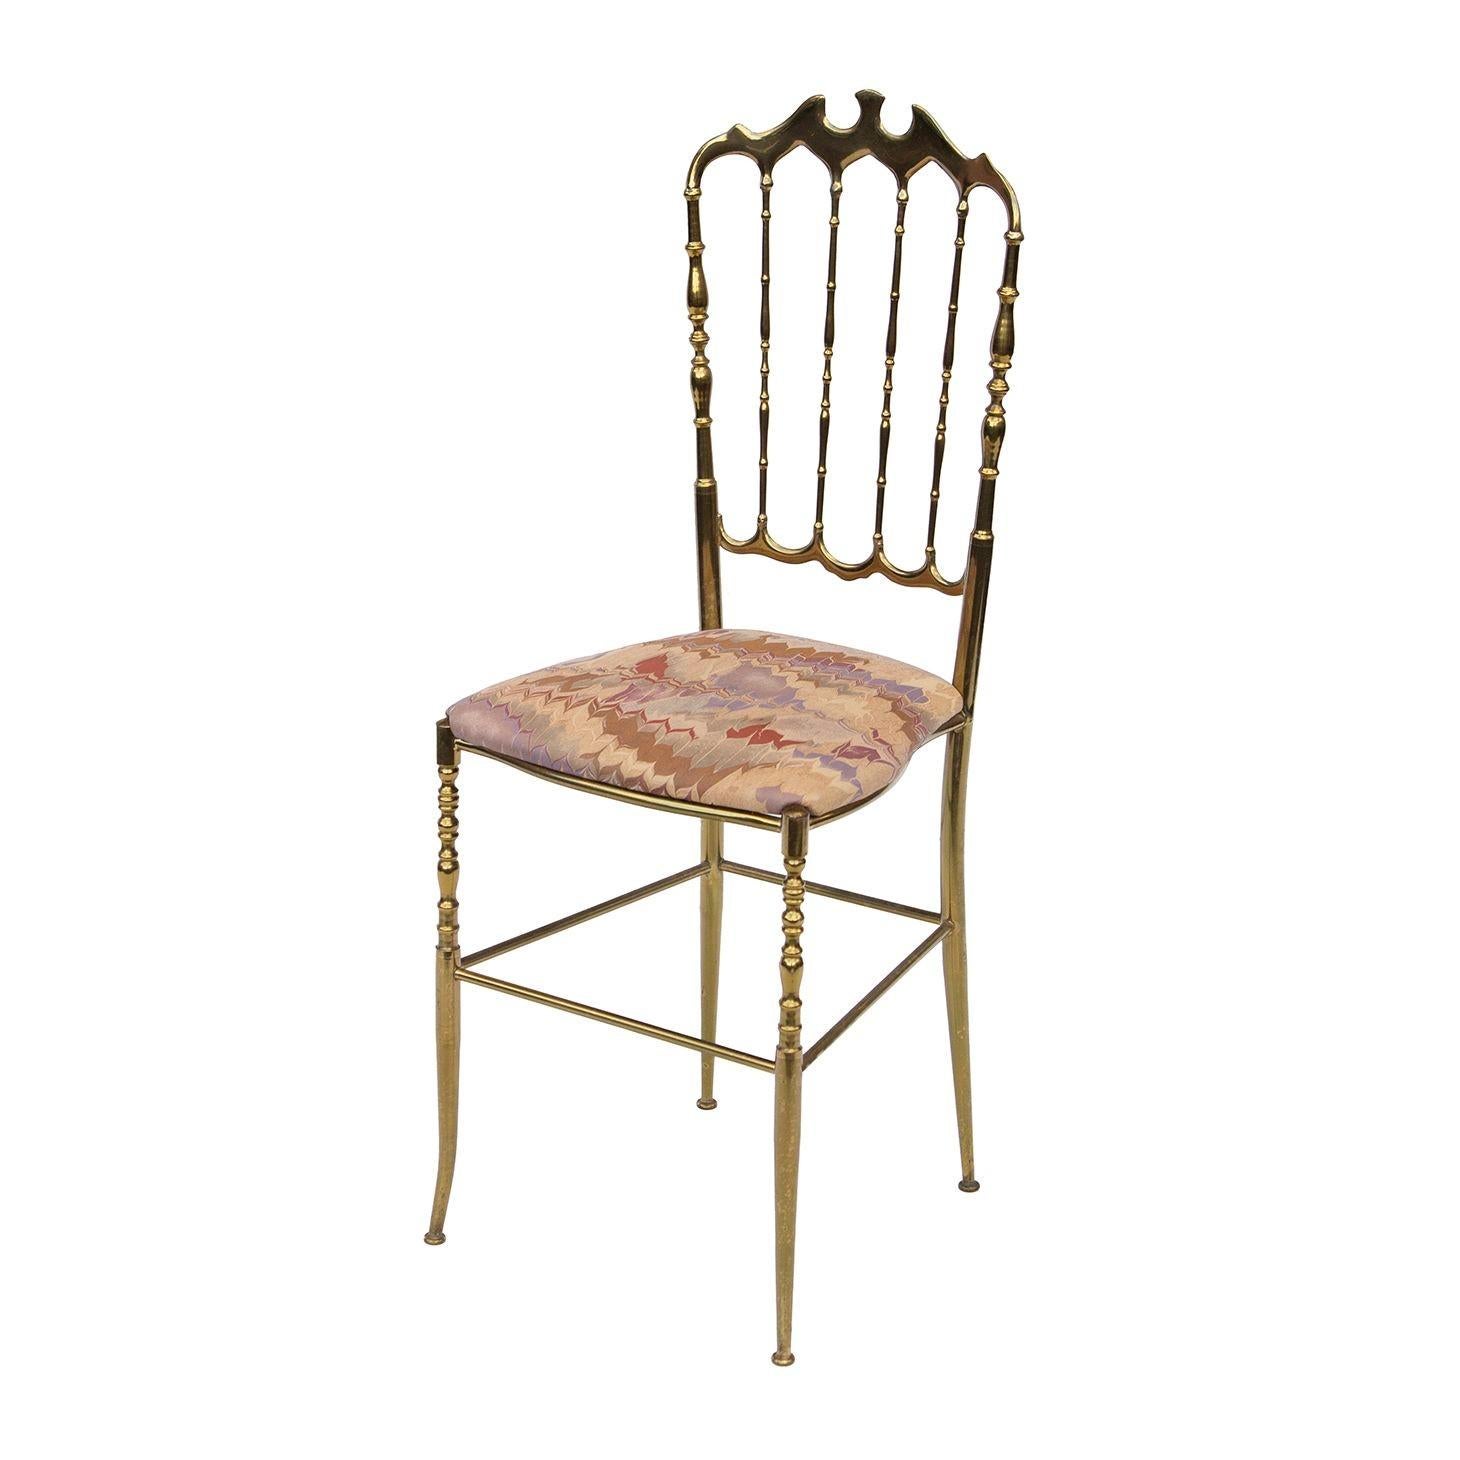 Italy, 1960s
Chiavari Italian brass side chair. Polished solid brass frame is slim and beautiful. This chair is more petite than most.
CONDITION NOTES: Solid brass frame is in very good condition. Seat upholstery is in ok condition but not perfect.